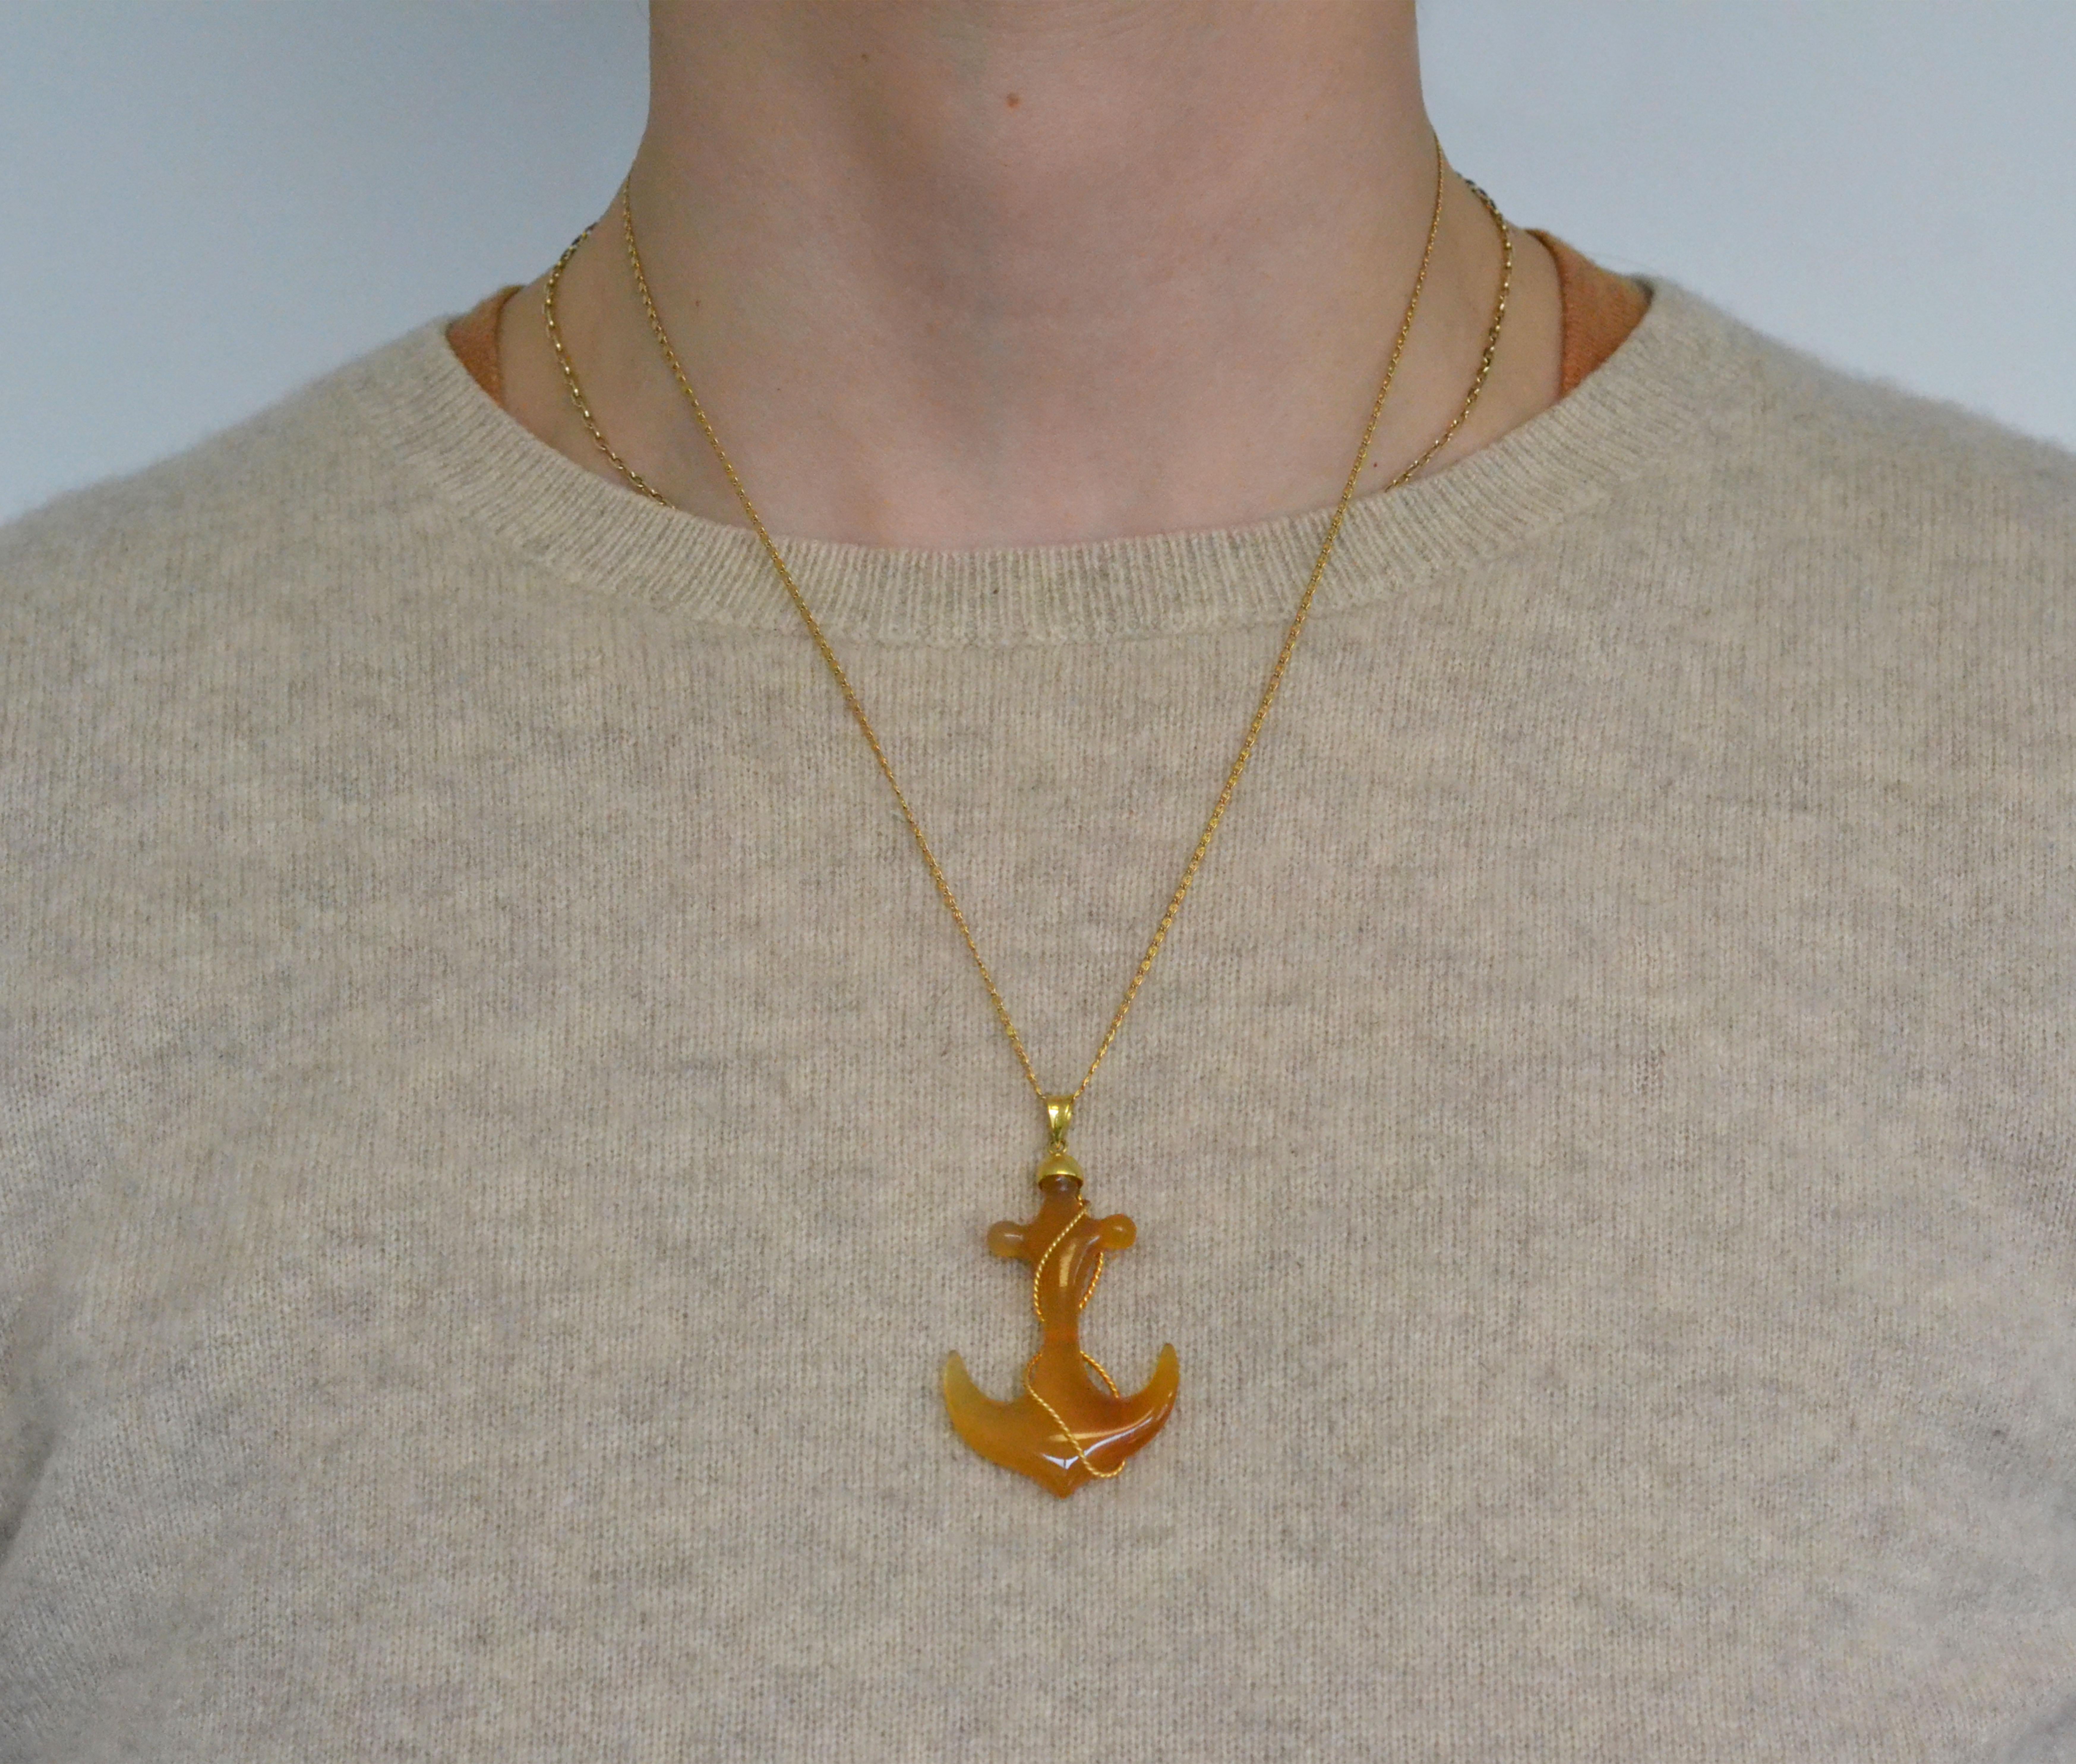 Vintage 18k Gold Agate Anchor Pendant Limited Edition

These stunning anchor pendants come on a solid 18k yellow gold chain and make for the perfect statement necklace. In a variety of colours, these pendants are perfect for a day out on the boat,